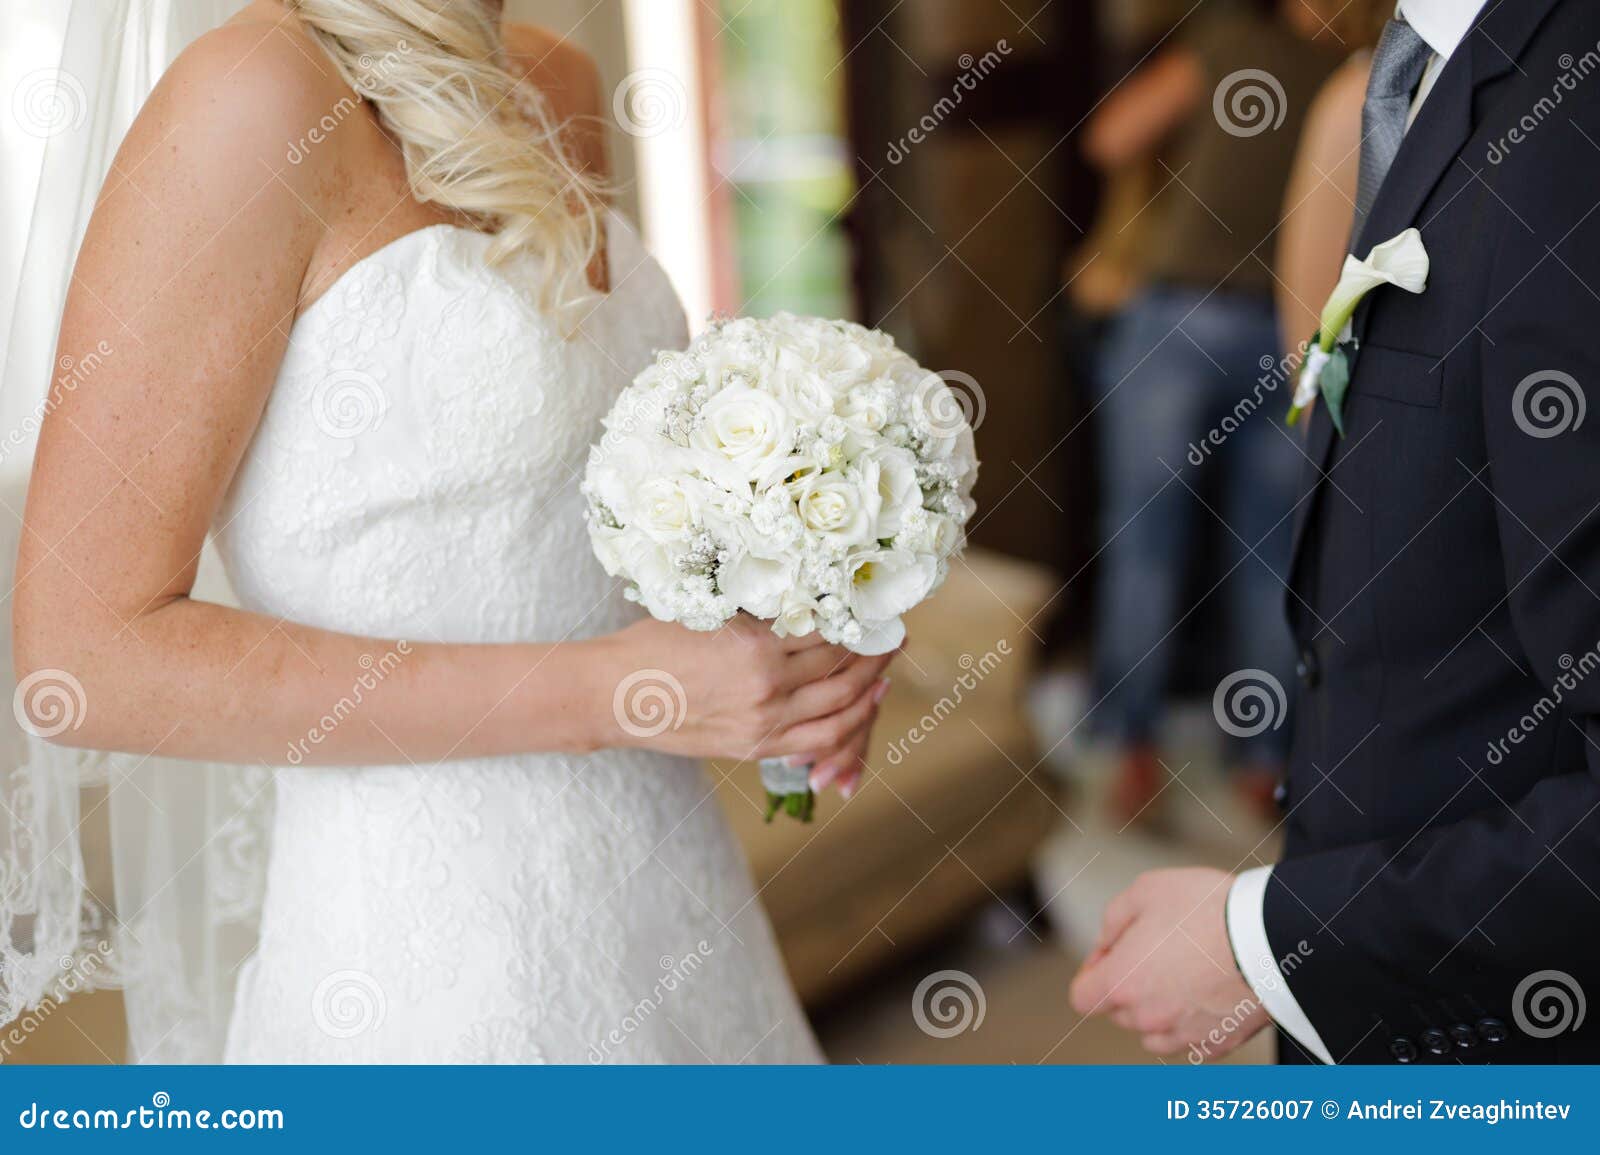 Bride and Groom before Ceremony Stock Image - Image of nature, groom ...